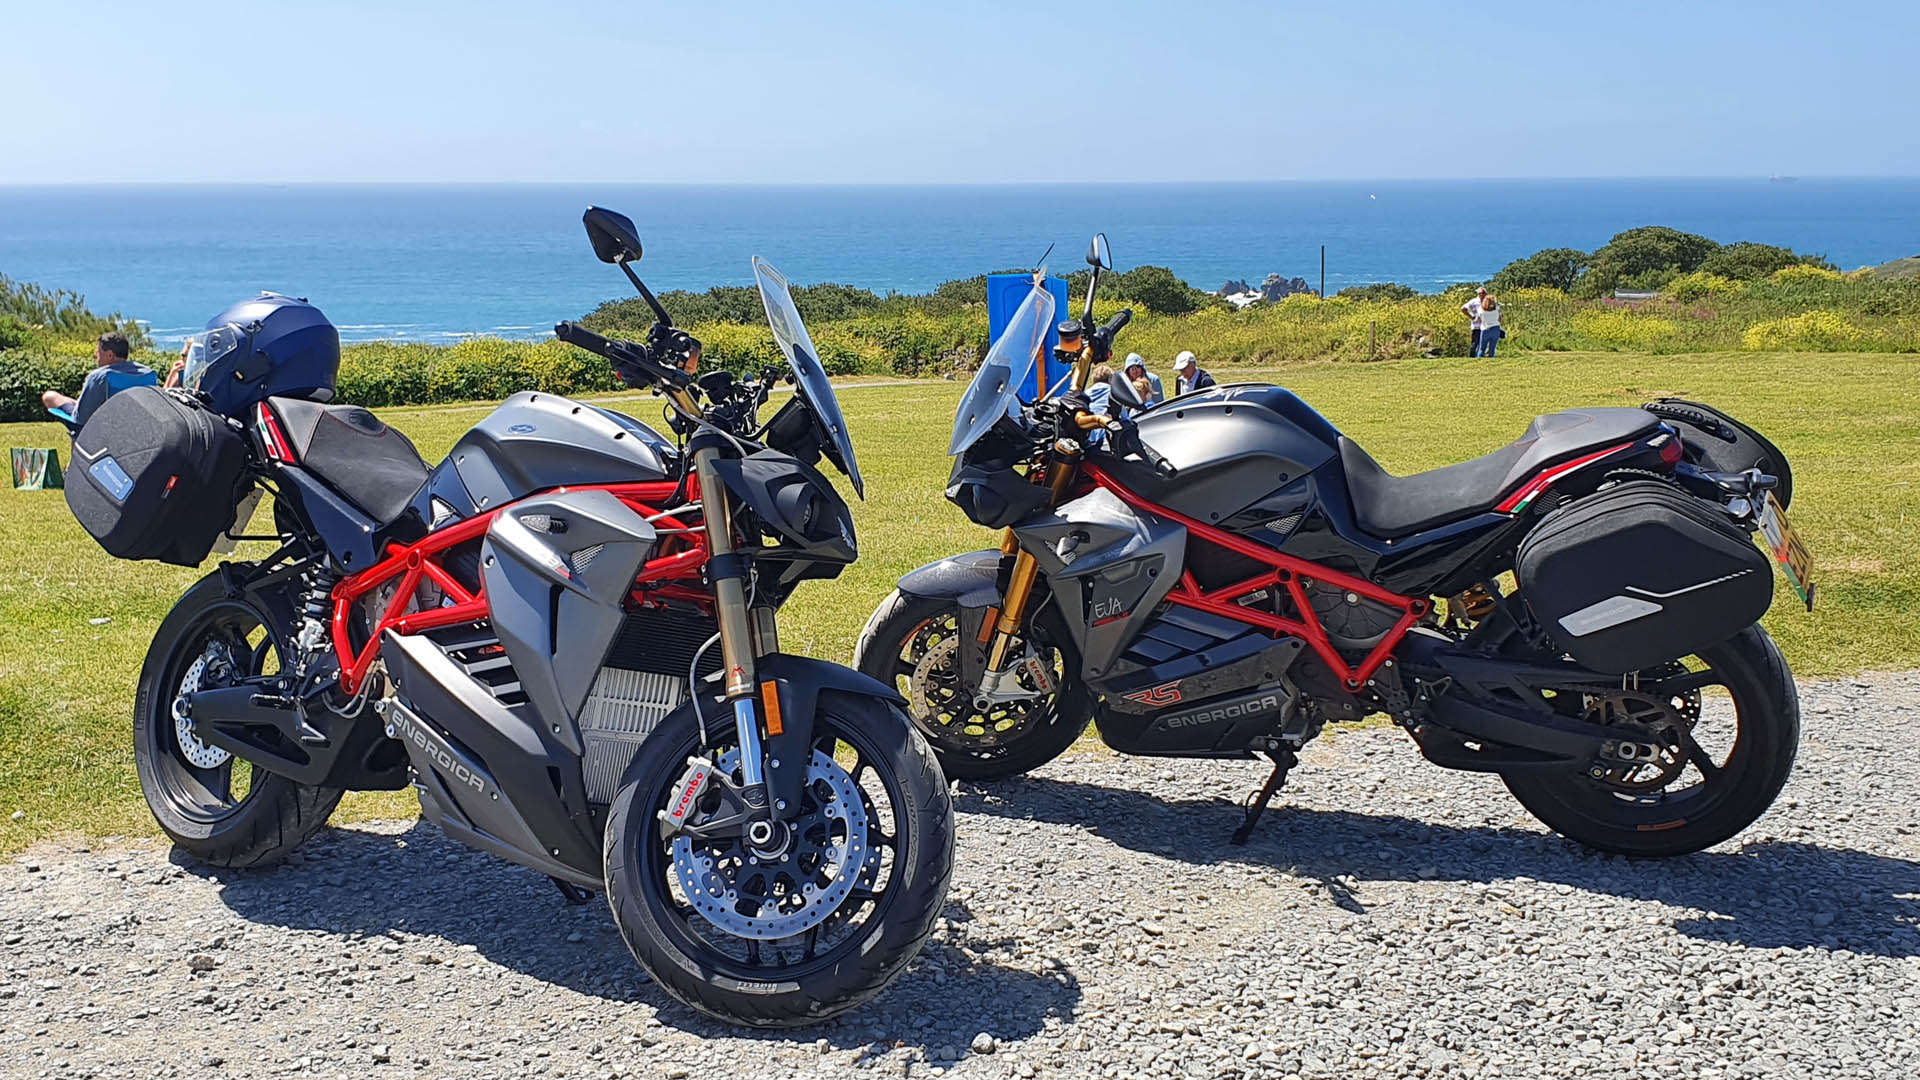 John's Energica EVA Ribelle with the Energica EVA Ribelle RS edition James rode. At Lizard Point, Sunday 12th June, 2022.